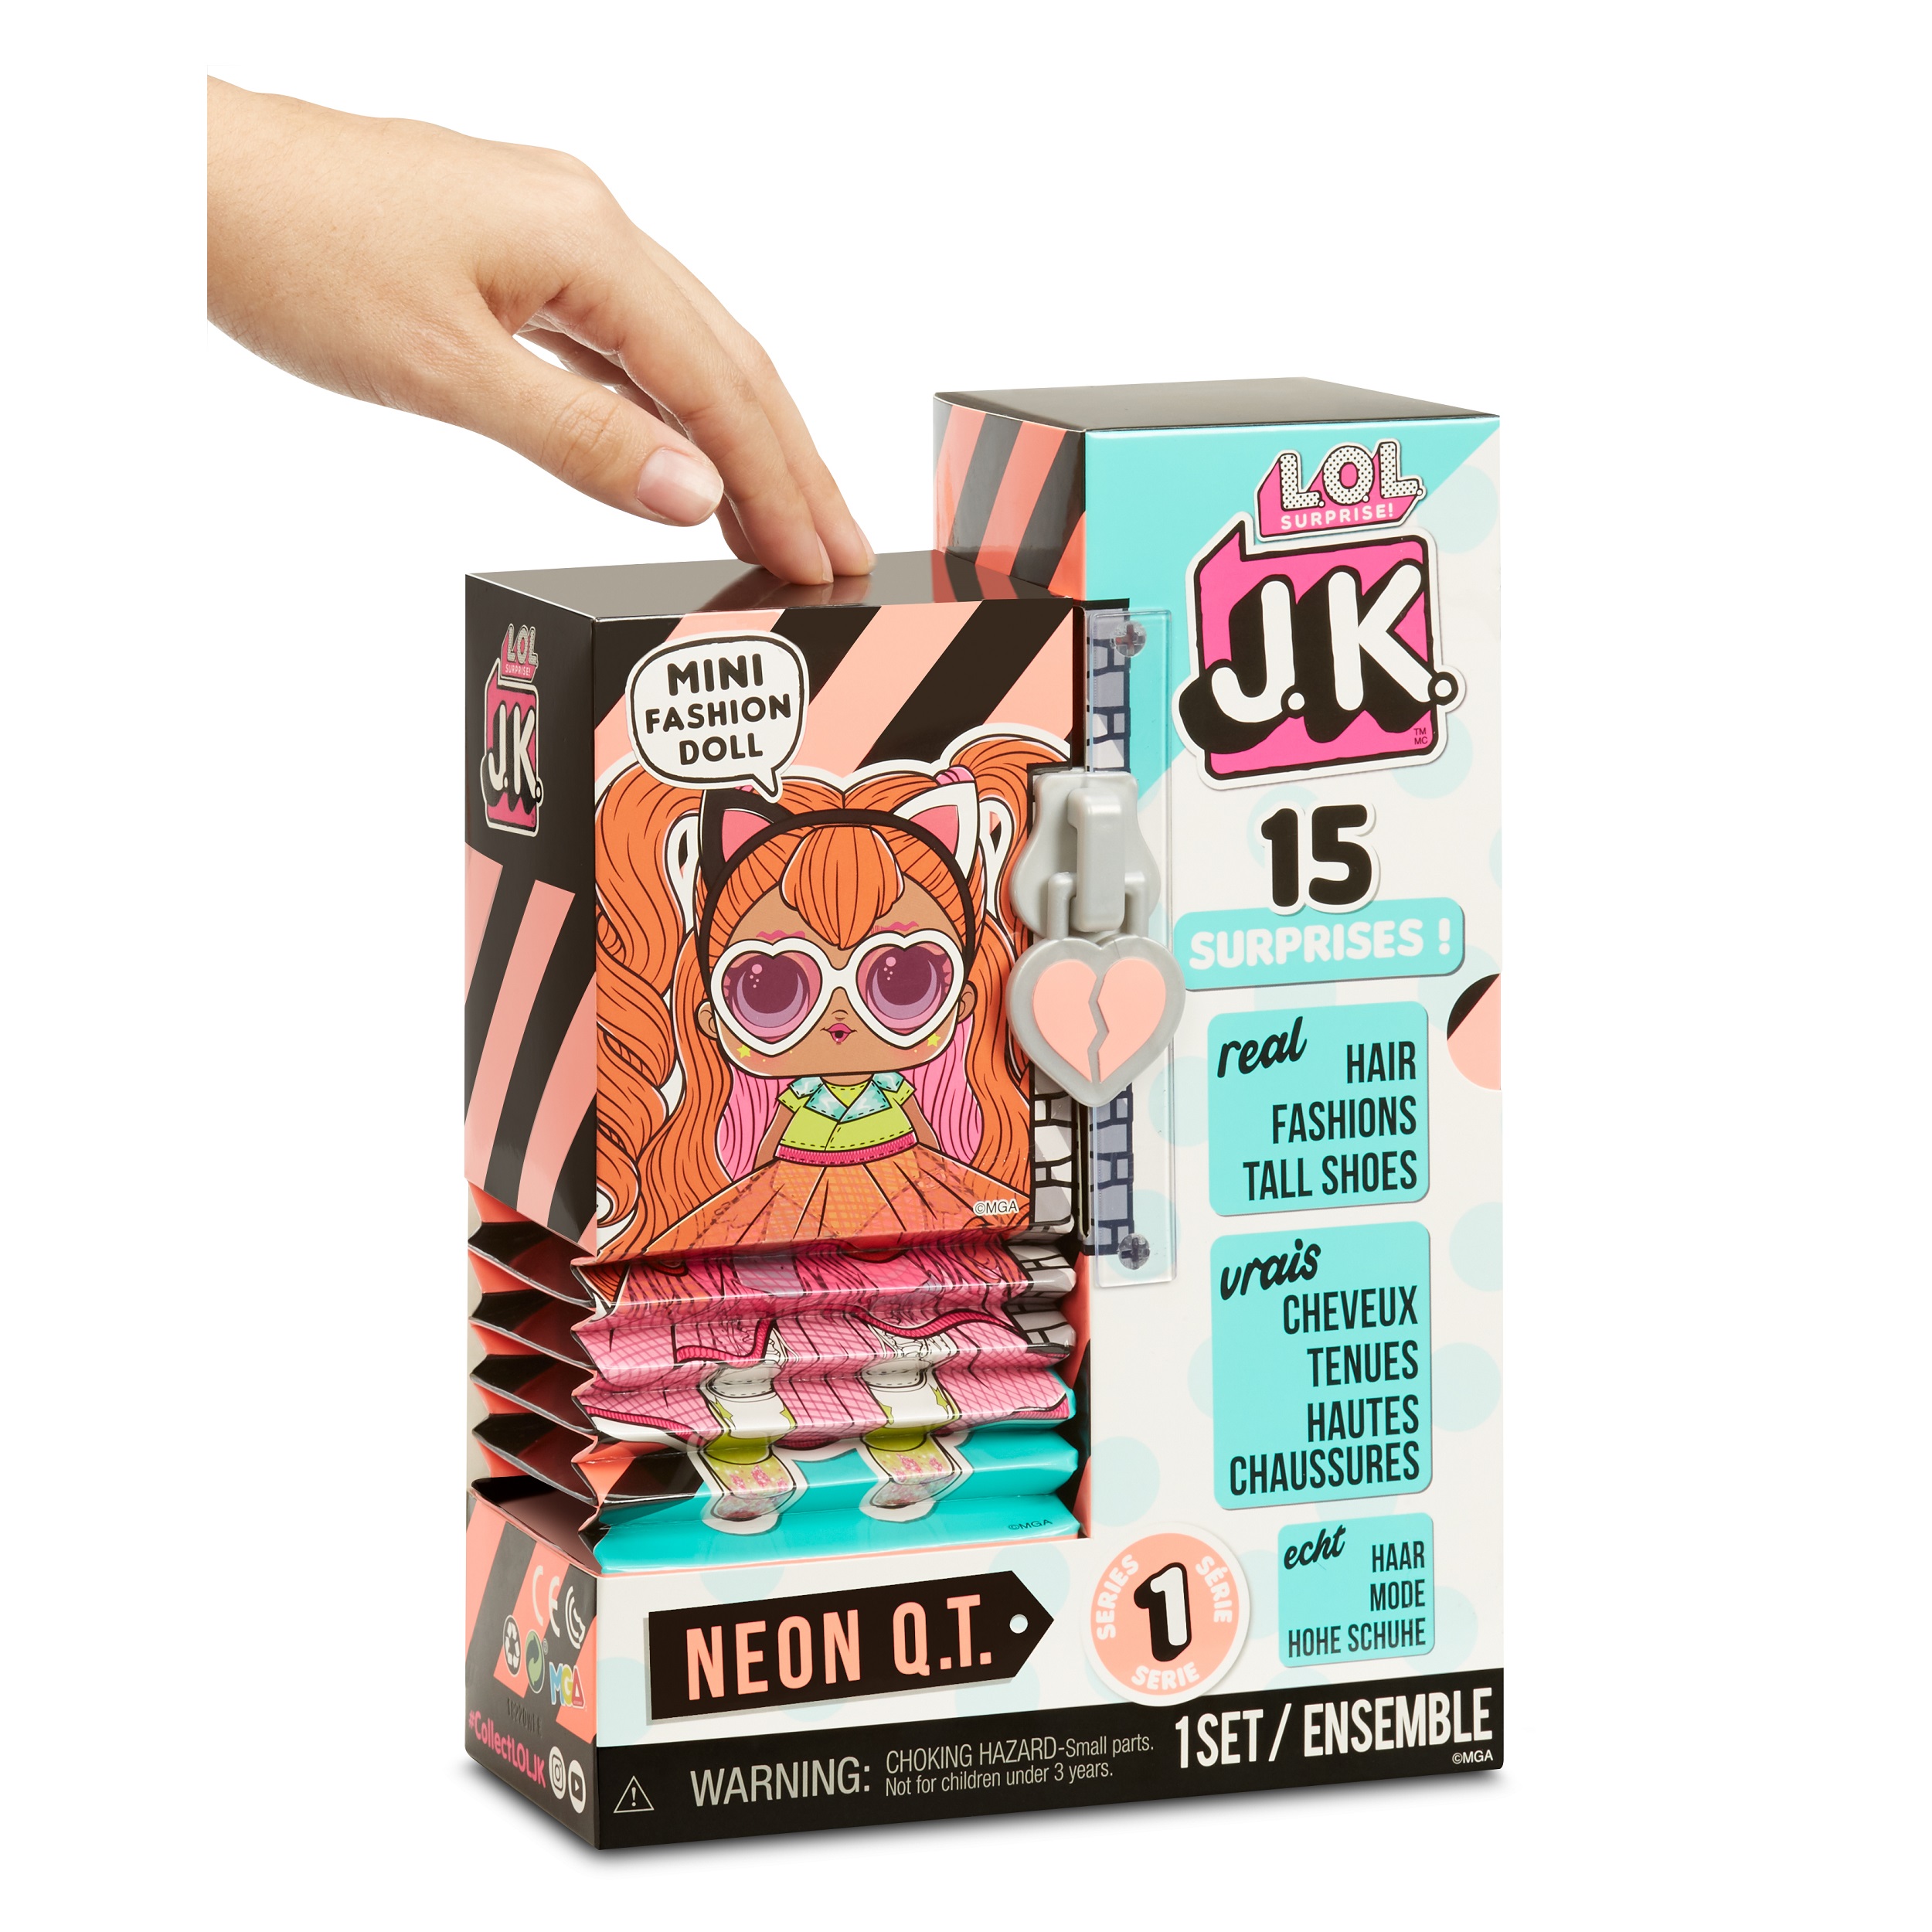 LOL Surprise JK Neon Q.T. Mini Fashion Doll With 15 Surprises, Great Gift for Kids Ages 4 5 6+ - image 4 of 7